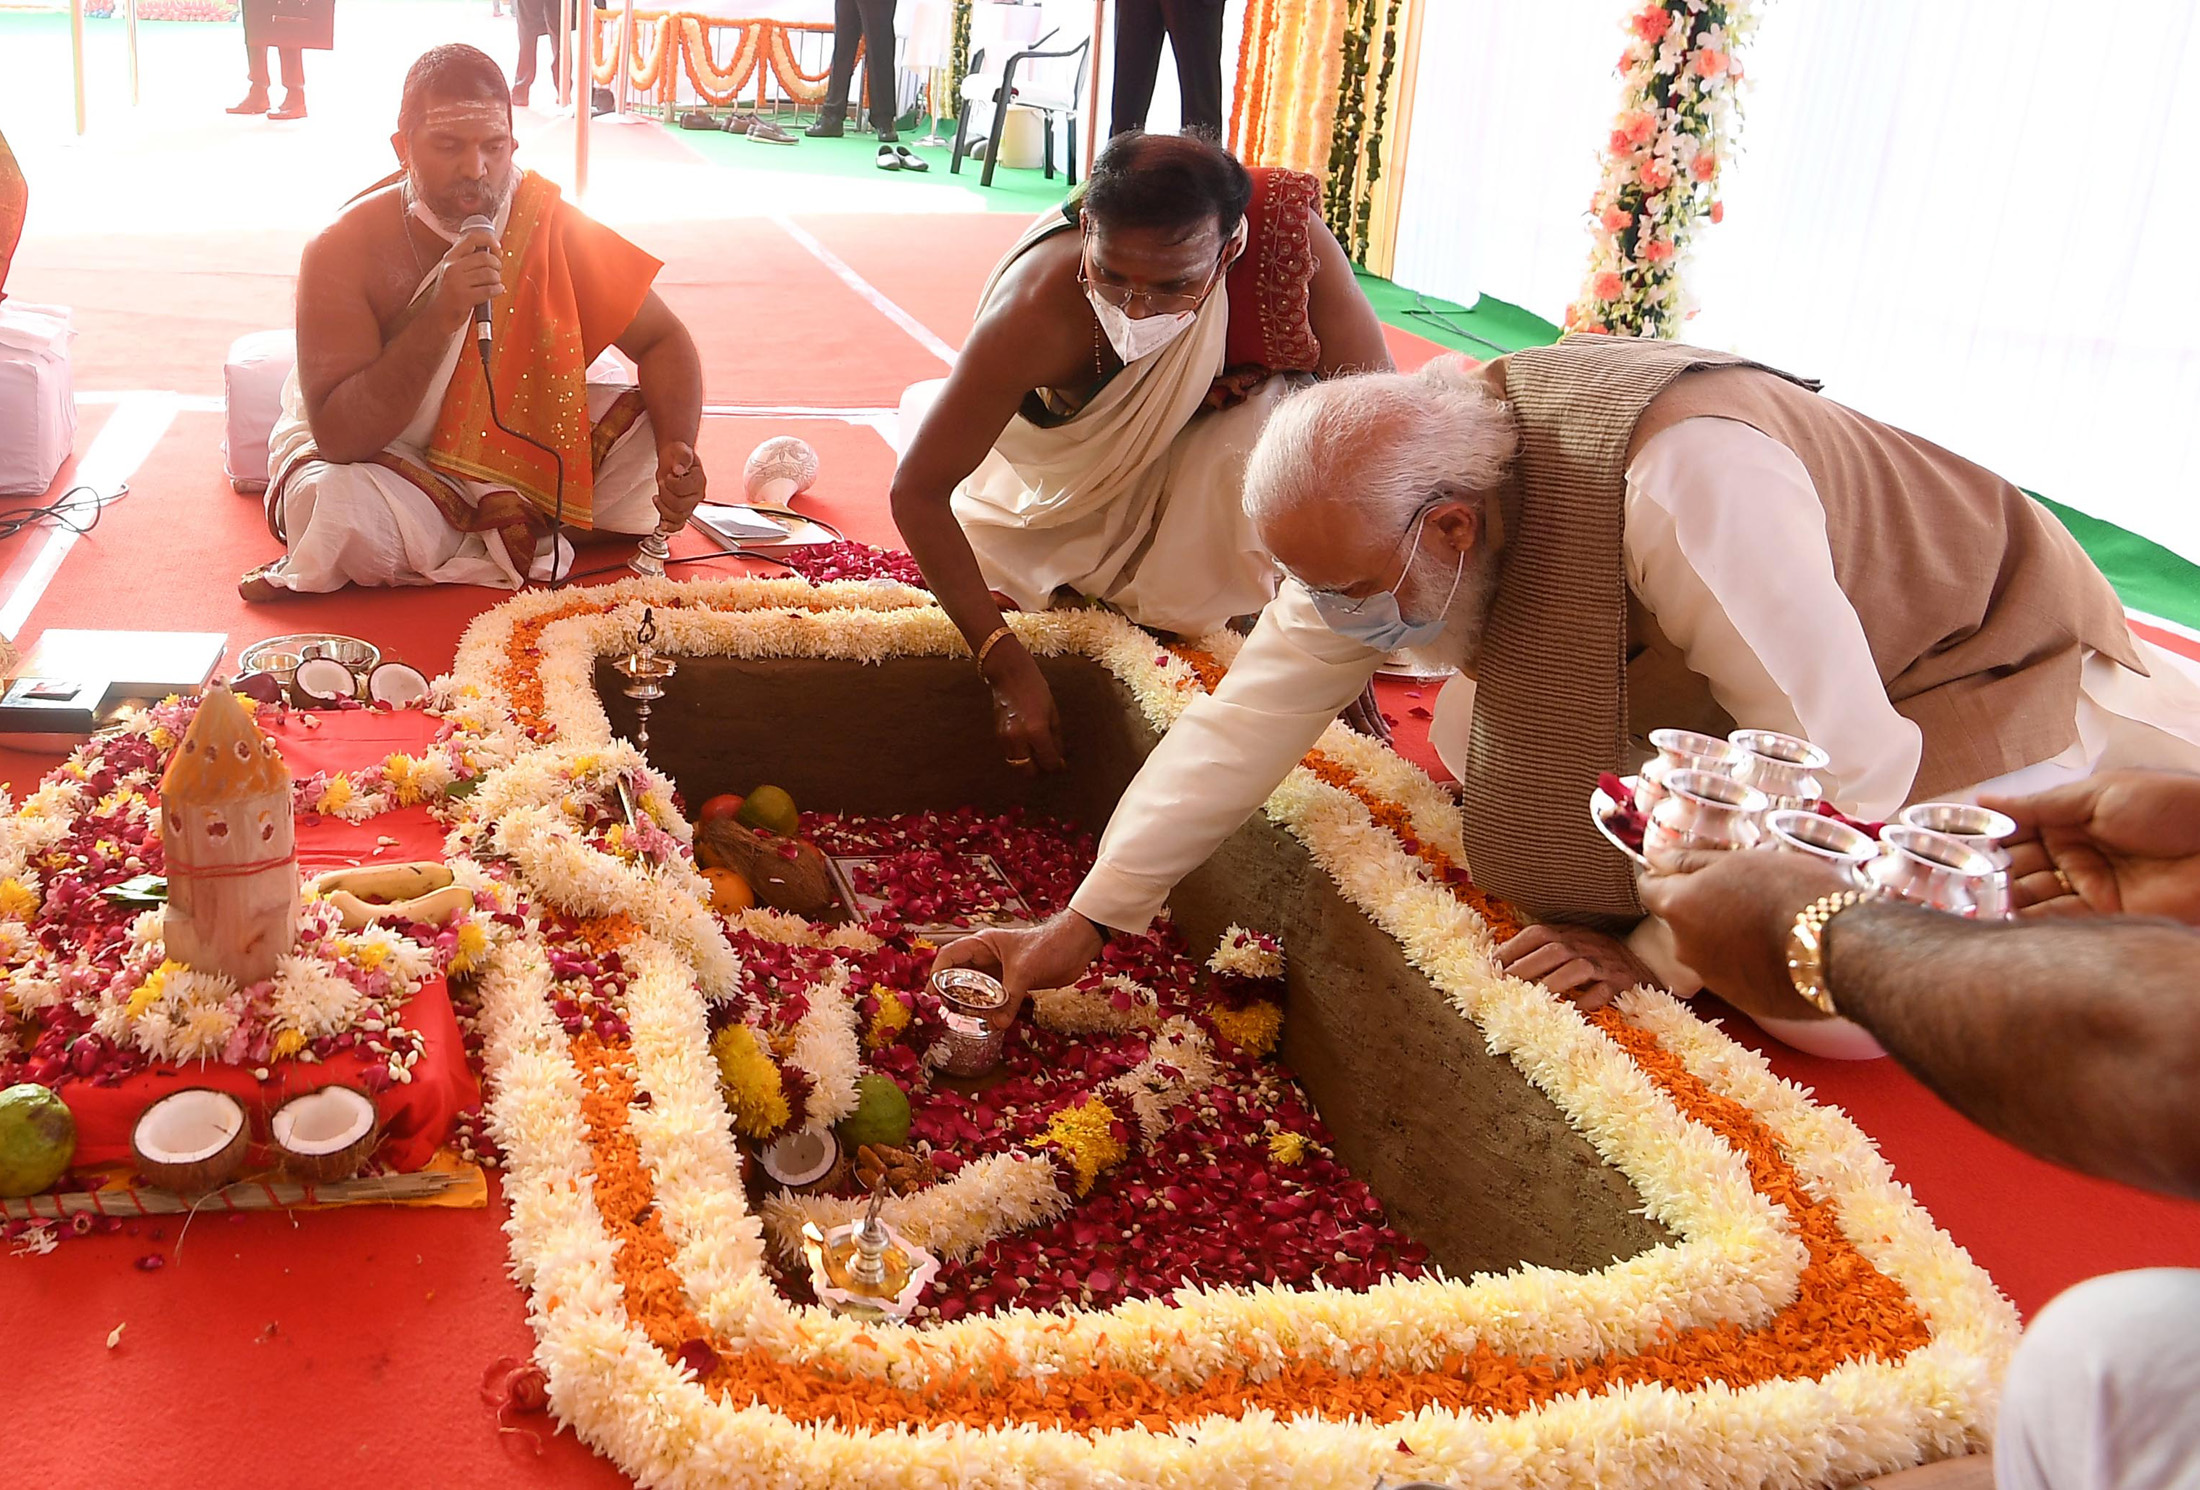 India’s Prime Minister Narendra Modi performing a Hindu ritual, ‘Bhoomi Pujan’, at the foundation stone laying ceremony of the country’s new parliament building : Press Information Bureau, Government of India